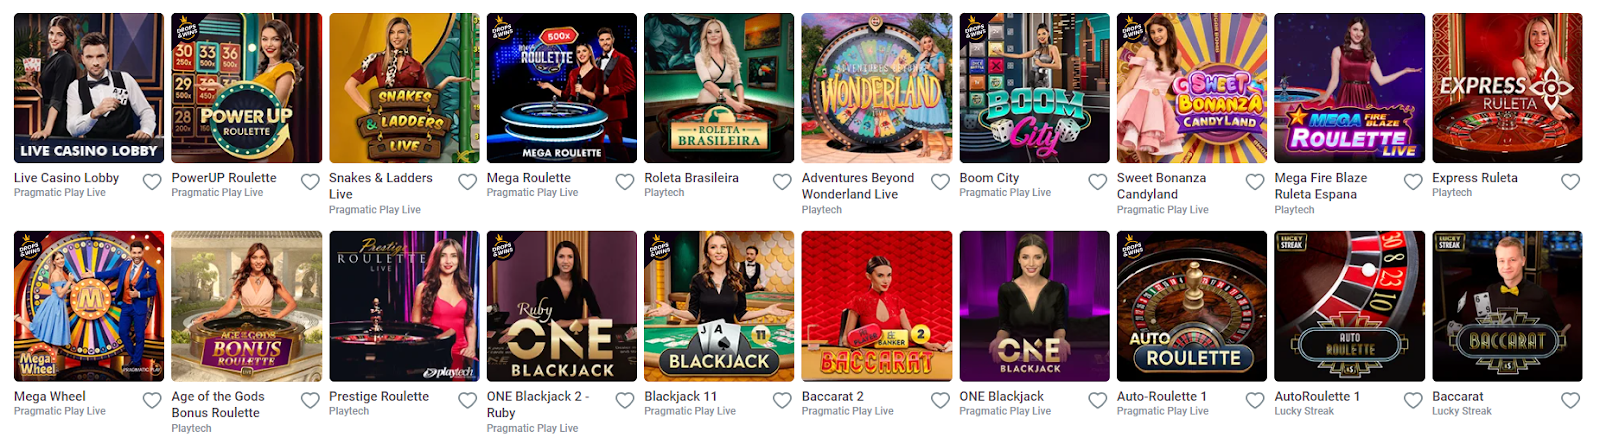 20Bet Casino is a diverse selection of the traditional live dealer games in their numerous variations as well as innovative game shows